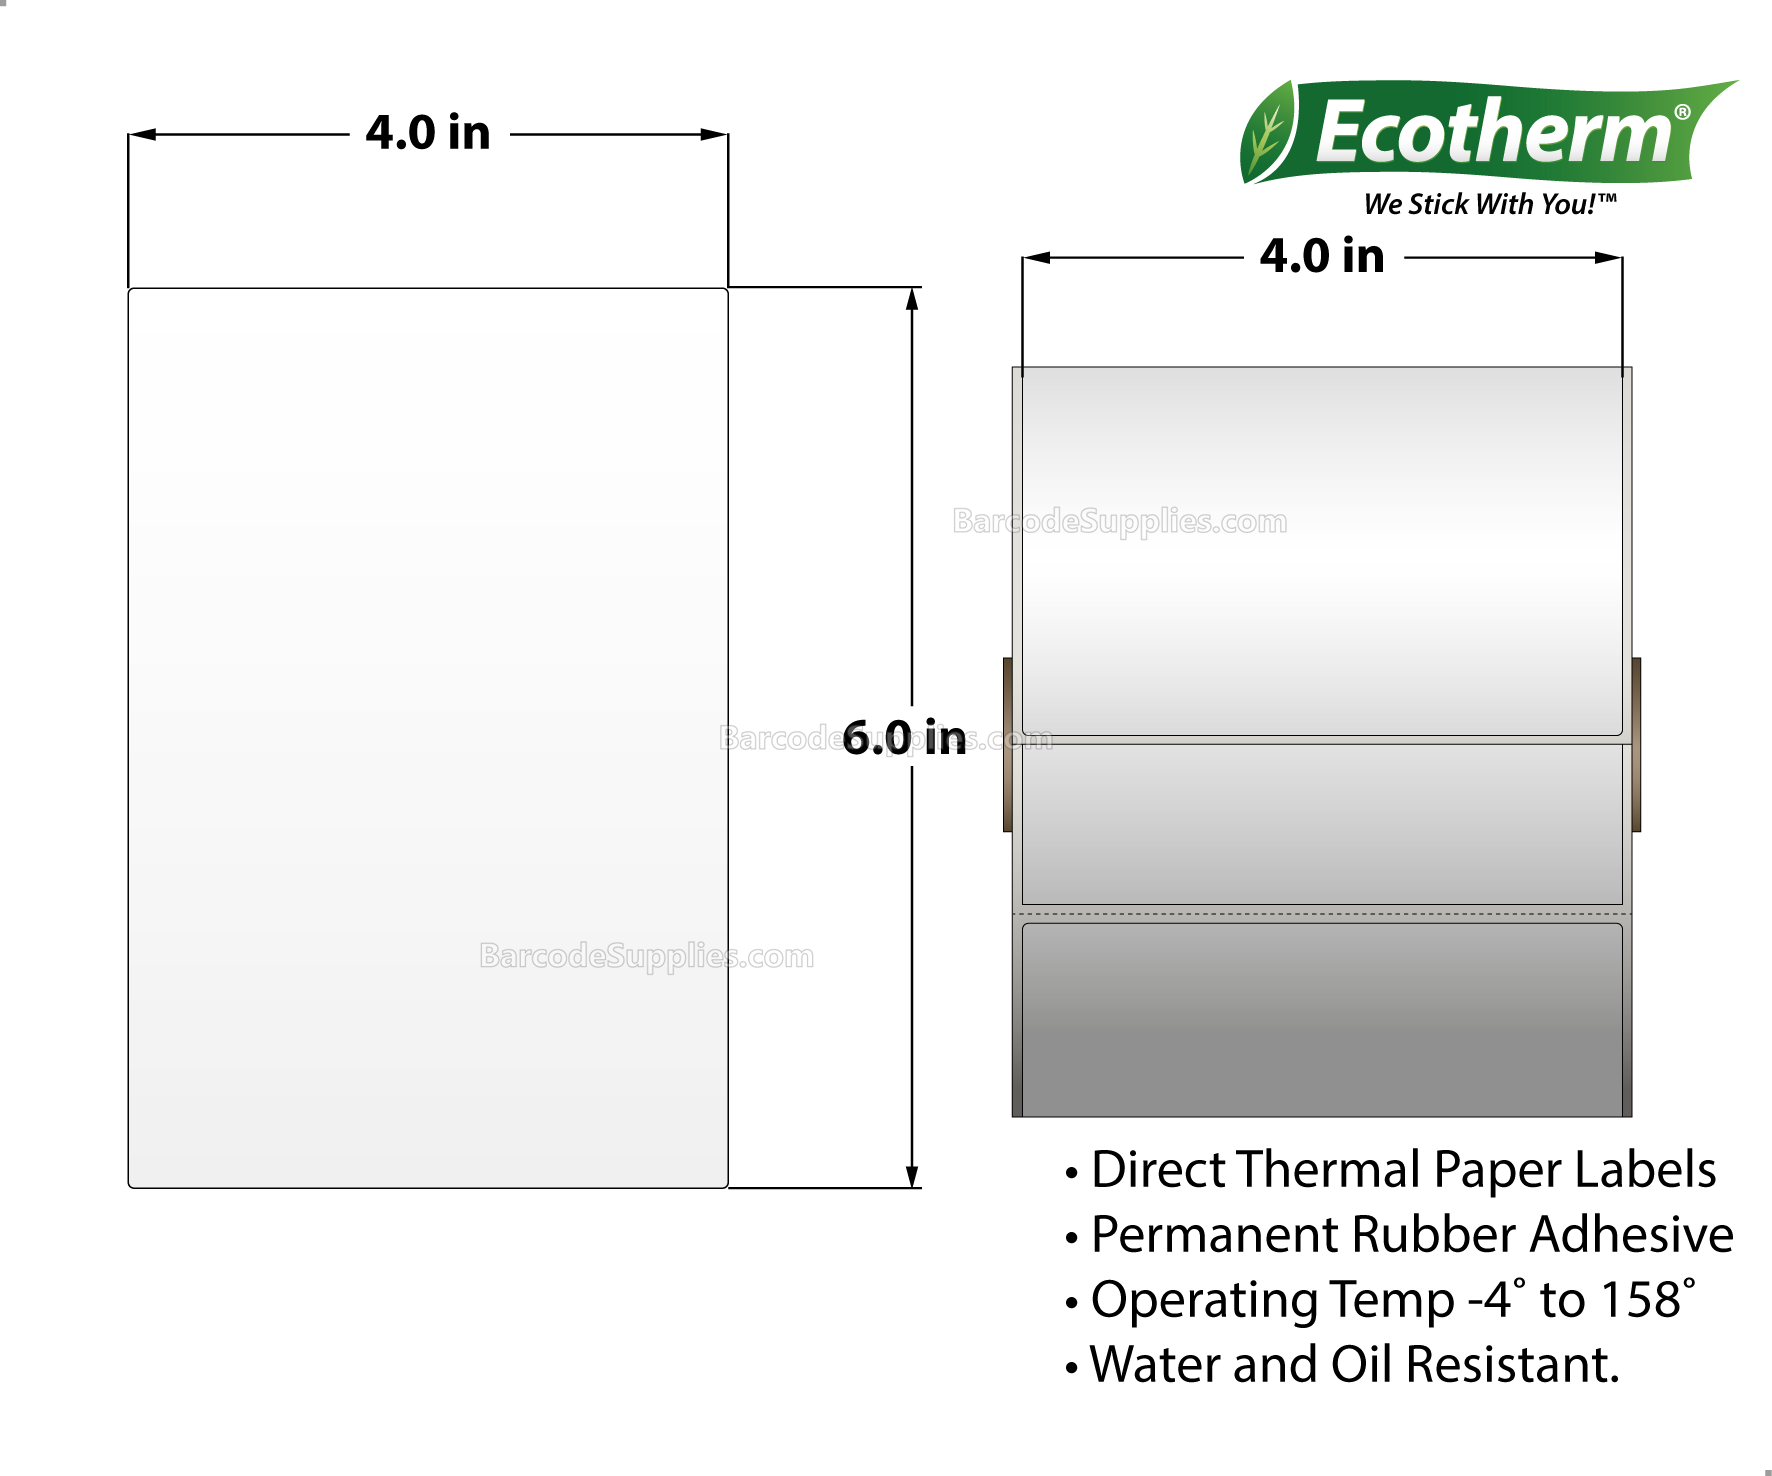 4 x 6 Direct Thermal White Labels With Rubber Adhesive - Perforated - 475 Labels Per Roll - Carton Of 6 Rolls - 2850 Labels Total - MPN: ECOTHERM15154-6